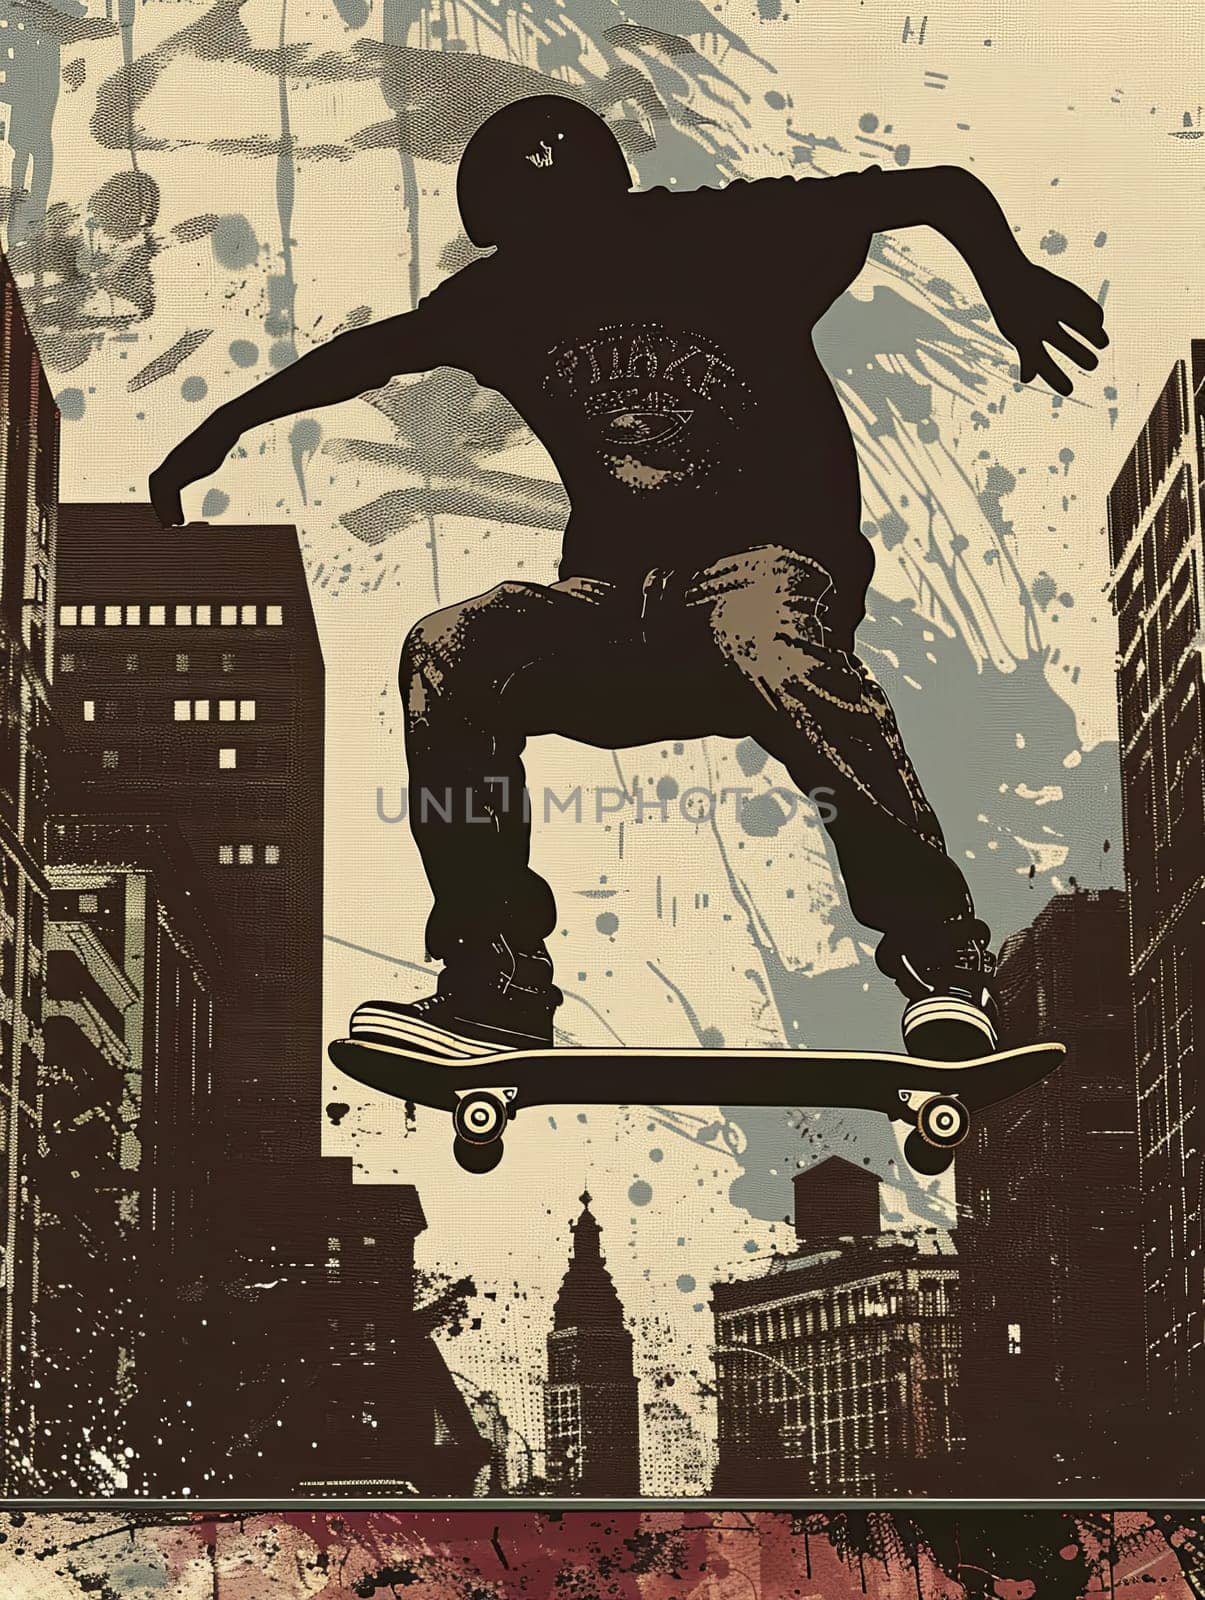 A man is riding a skateboard up the side of a ramp, showing skill and balance in this urban sports action.